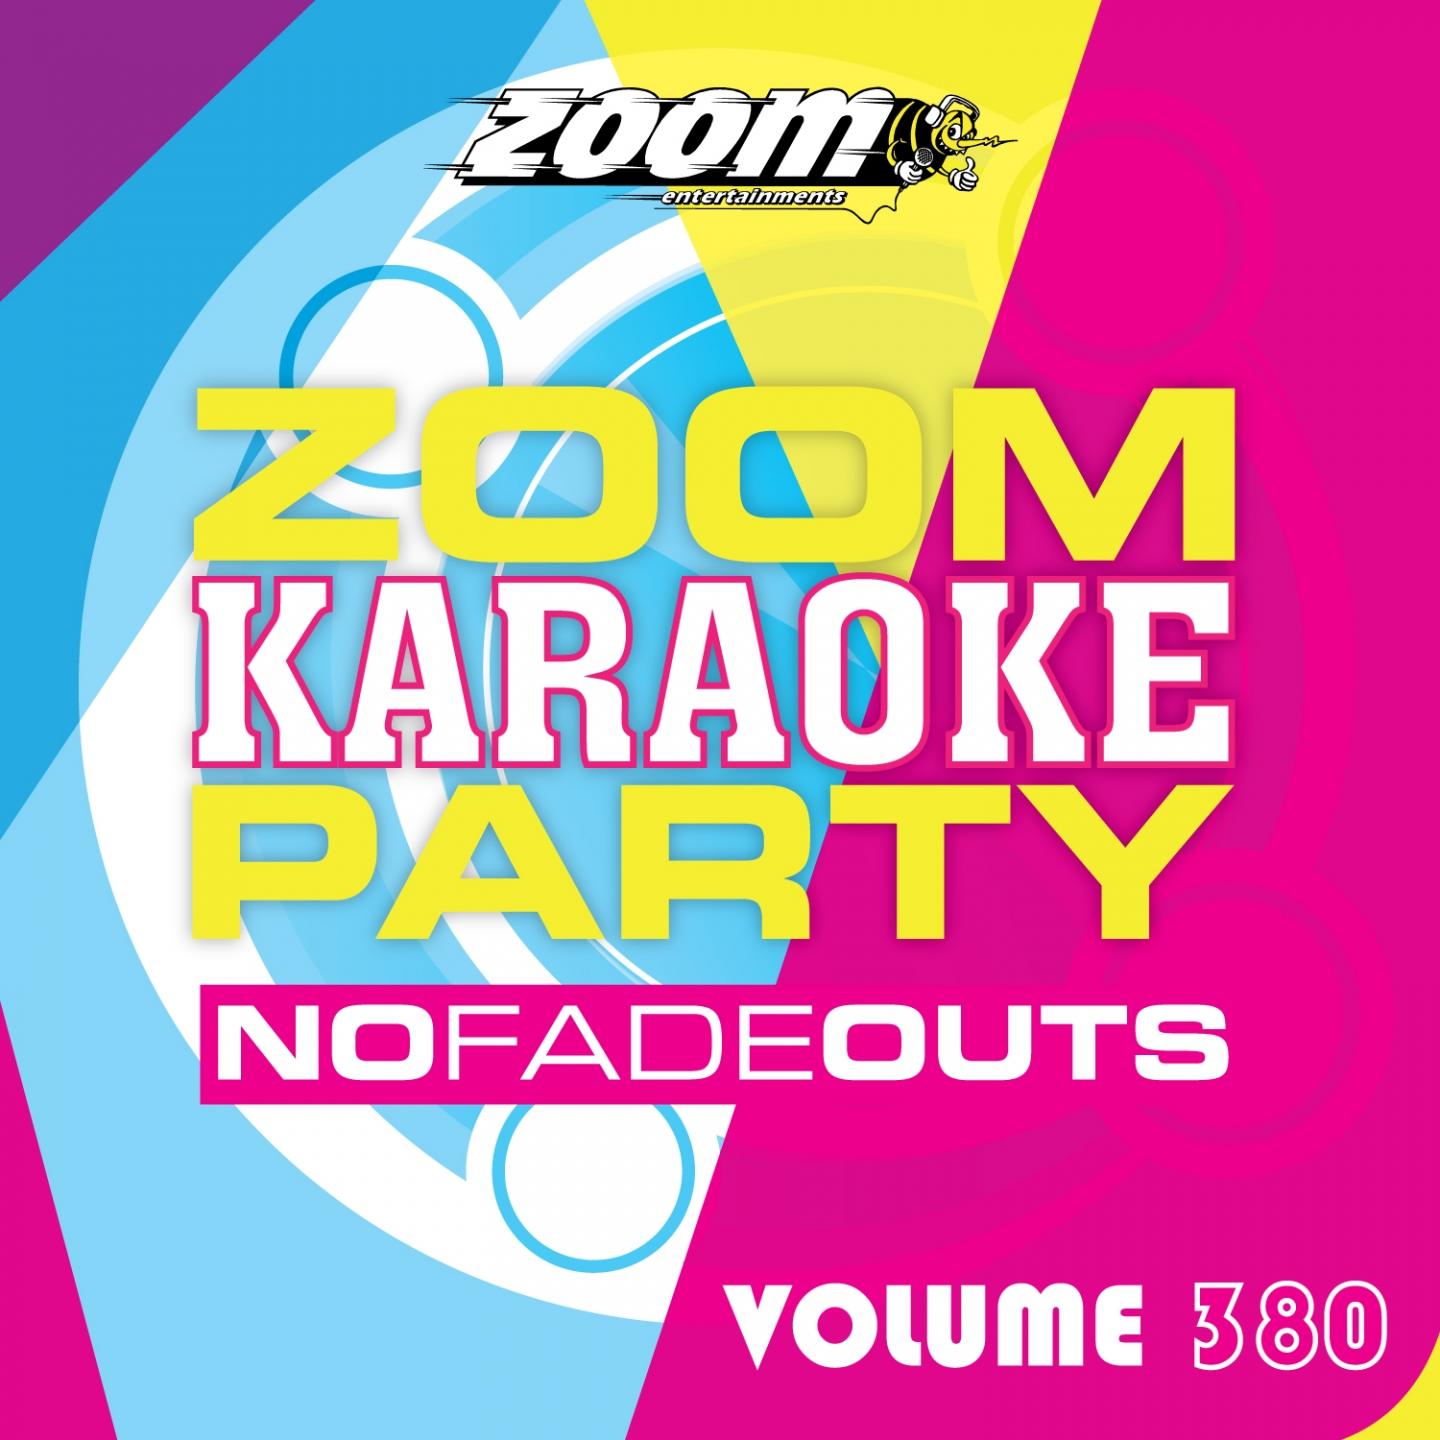 Prayer in C (Karaoke Version) [Originally Performed By Lilly Wood and the Prick Feat. Robin Schulz]